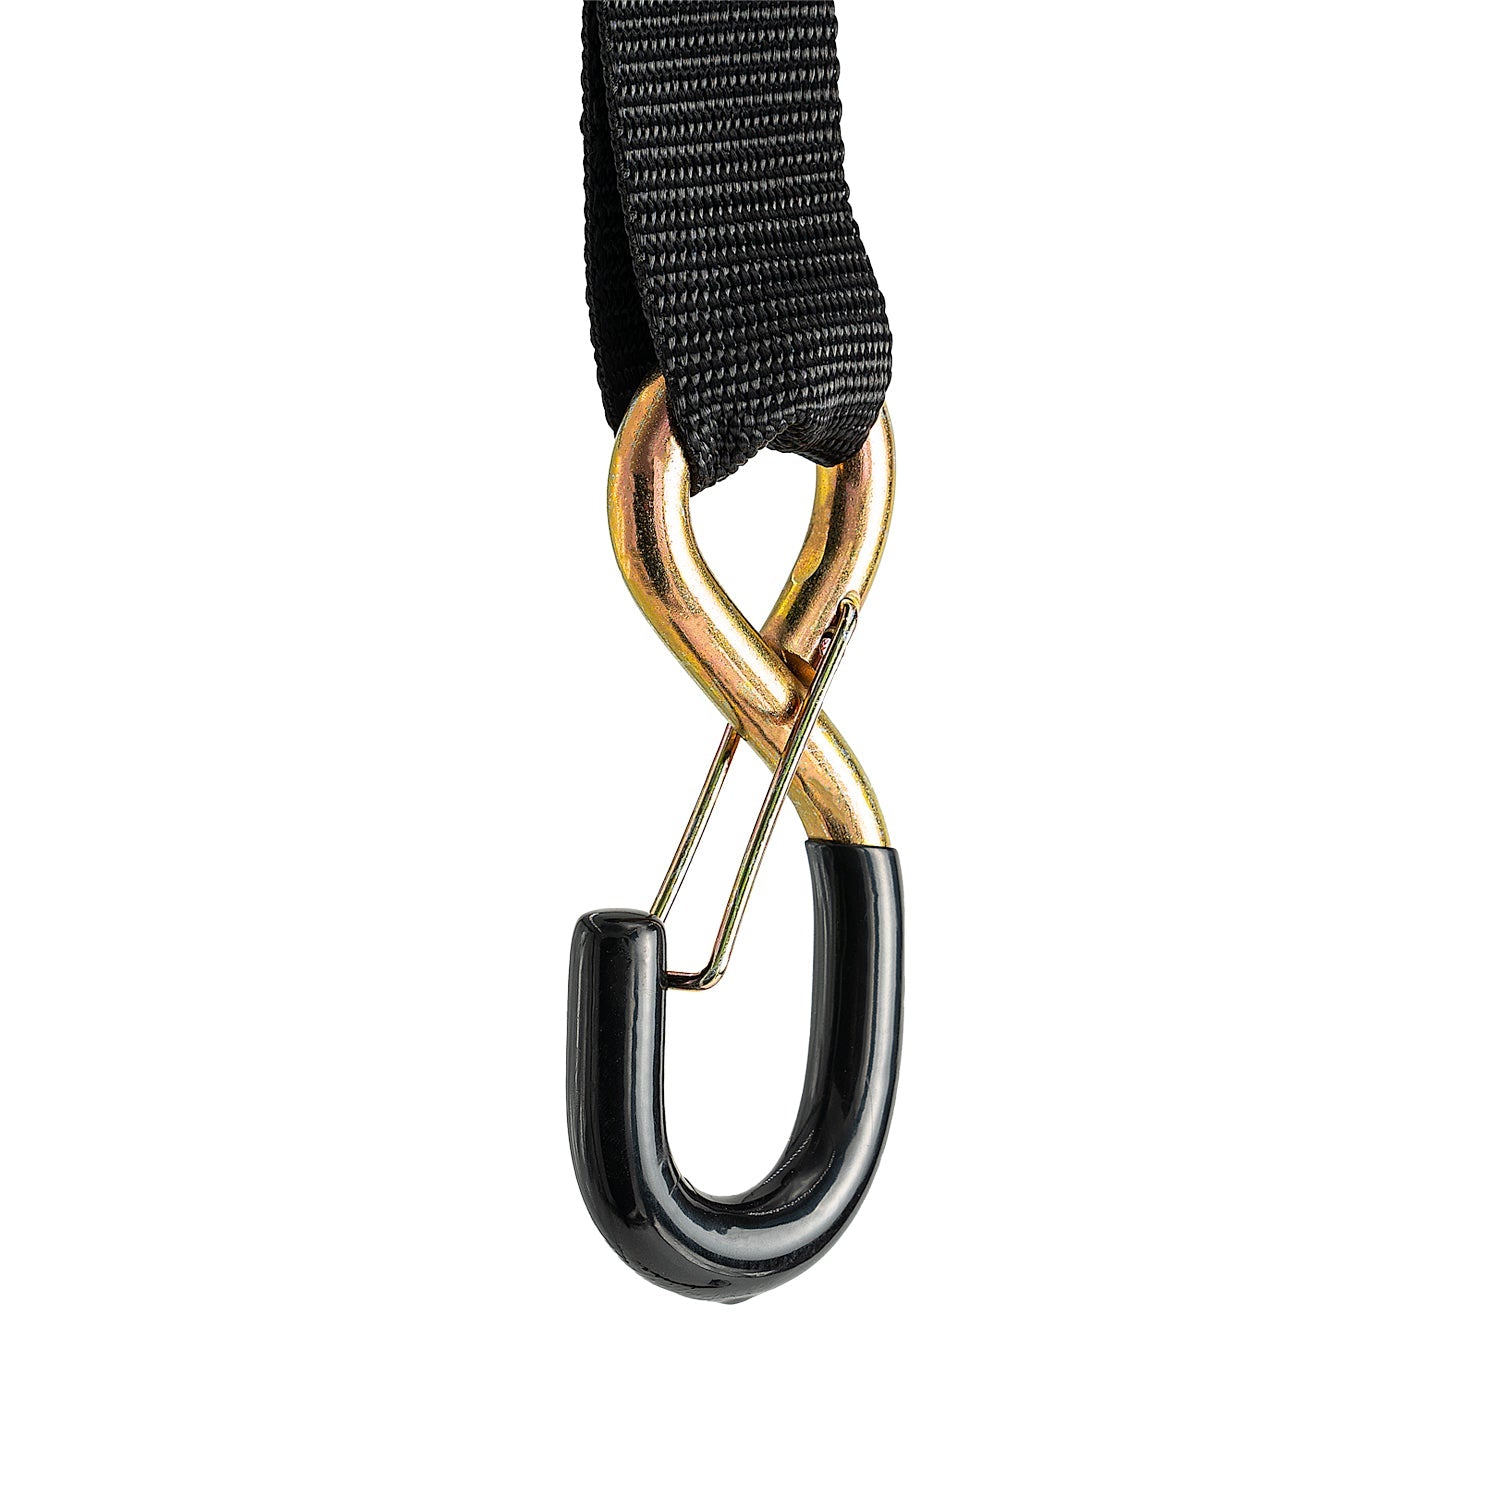 15ft x 1.5in ShockStrap Ratchet Strap, 1k WLL, Commercial Grade - The Perfect Bungee & ShockStrap Tie Downs